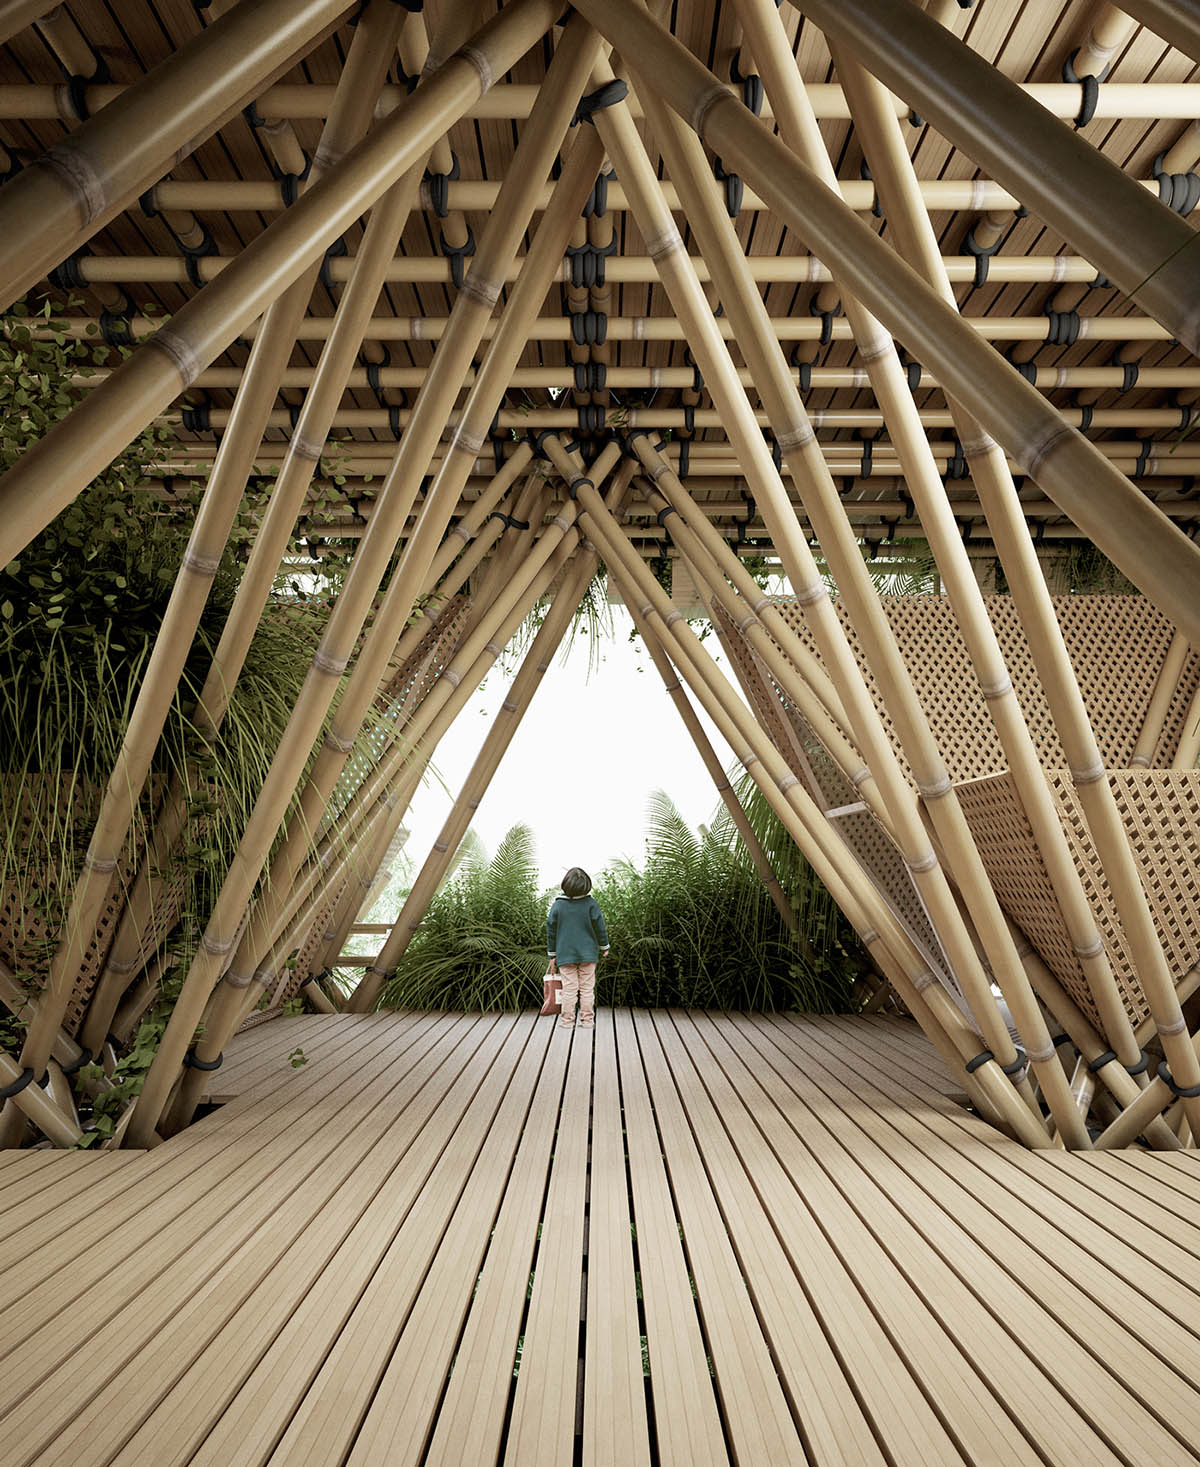 Penda revealed new ecological-Bamboo city vision rethinking the process and...